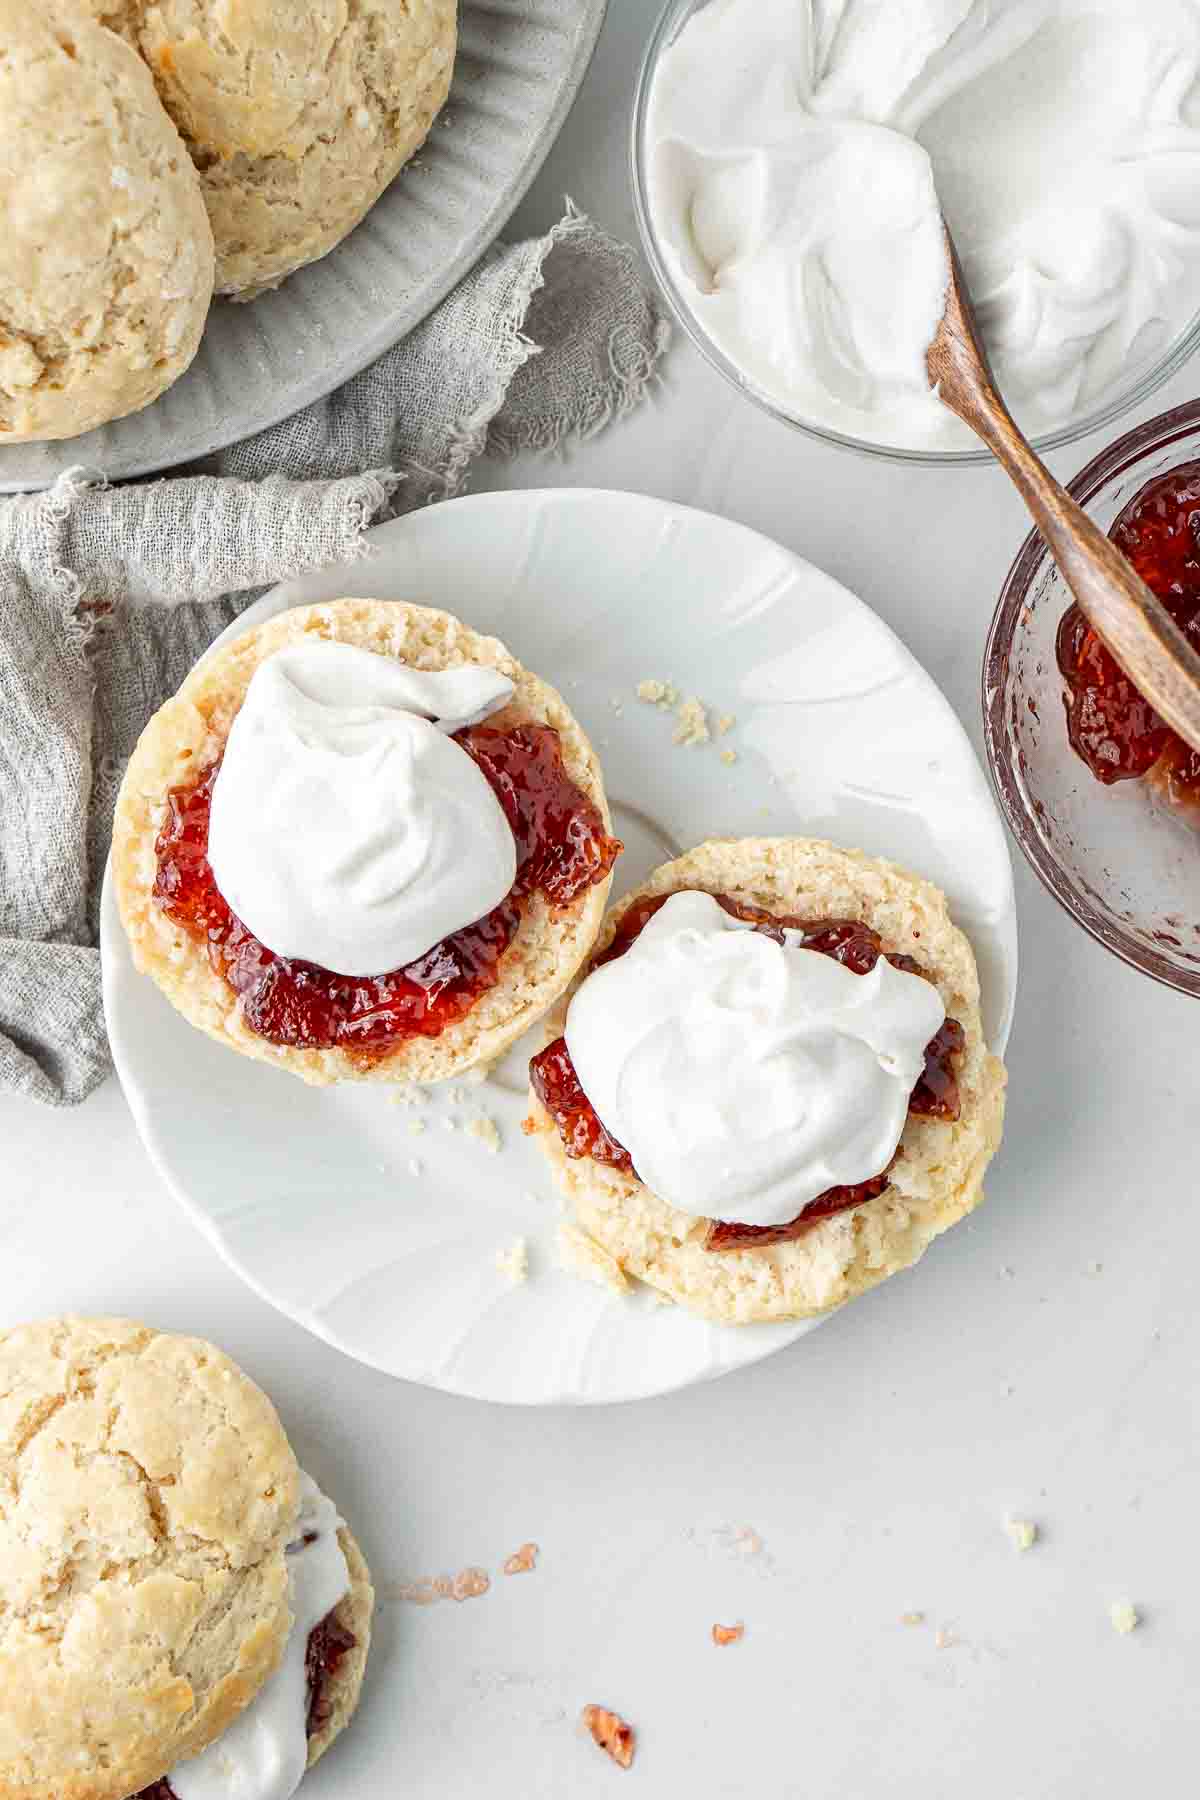 Scone that has been split and topped with jam and whipped coconut cream.